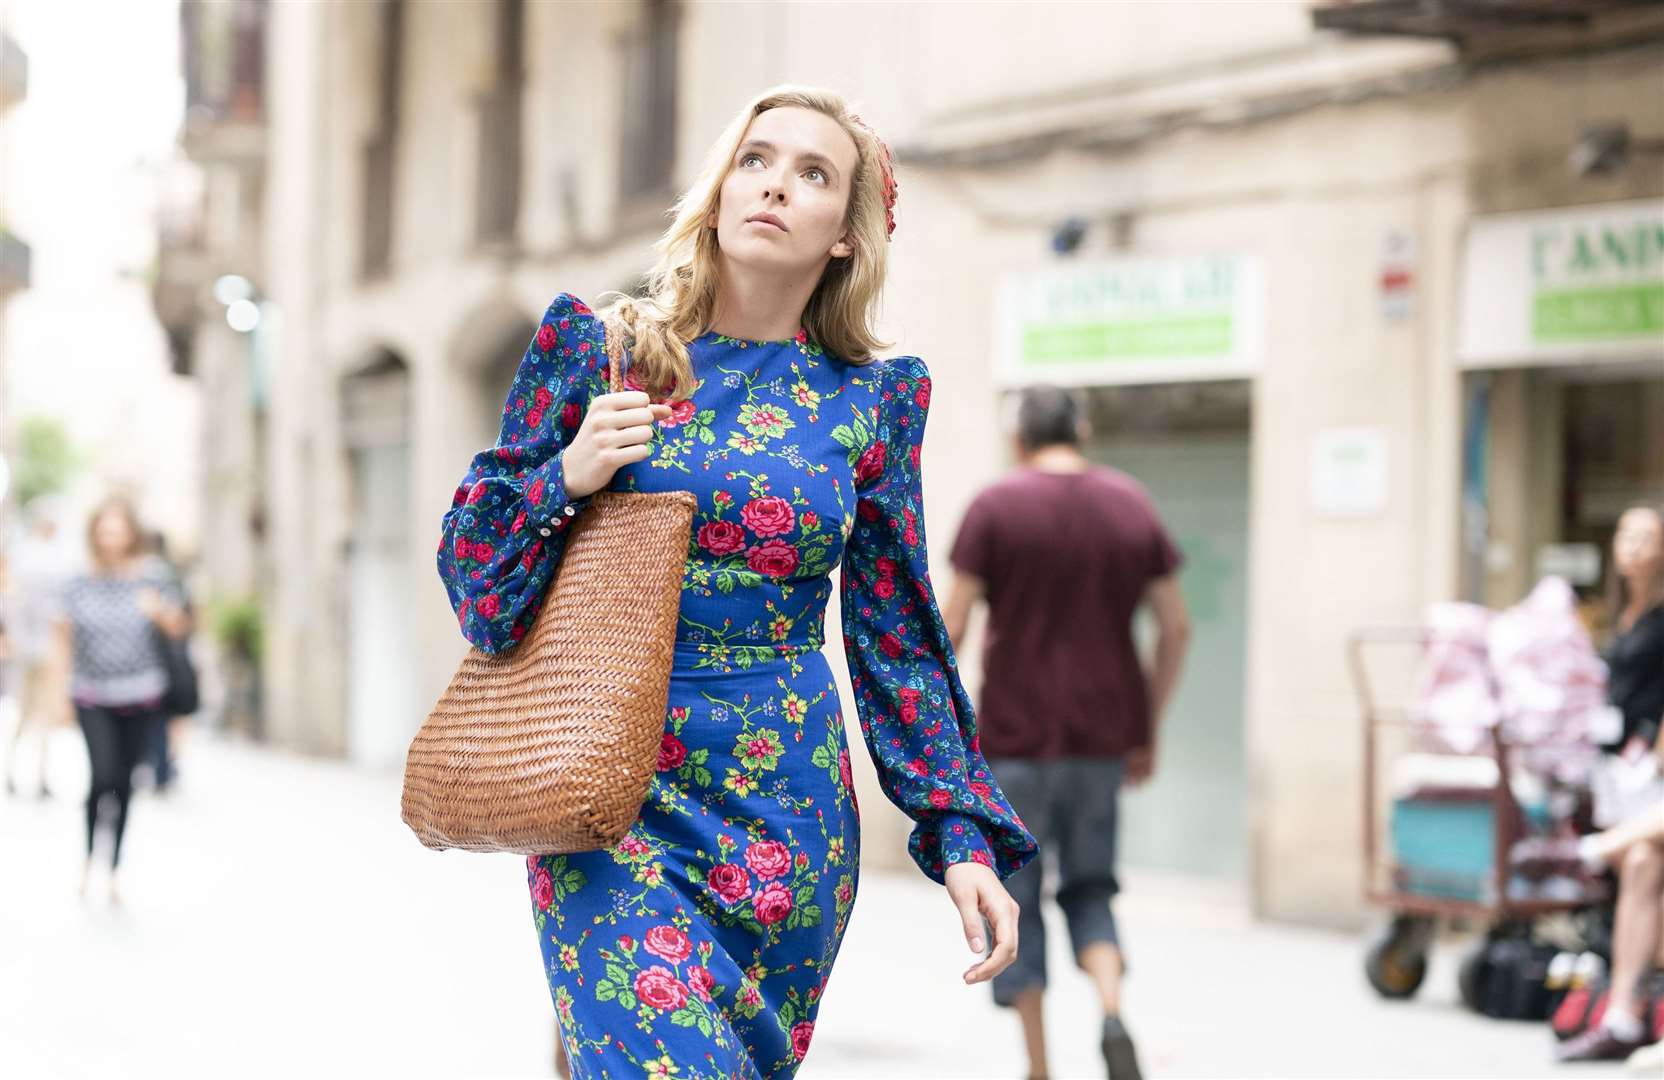 Jodie Comer as Villanelle i Killing Eve Series 3 on BBC Picture: PA Photo/BBC/Sid Gentle